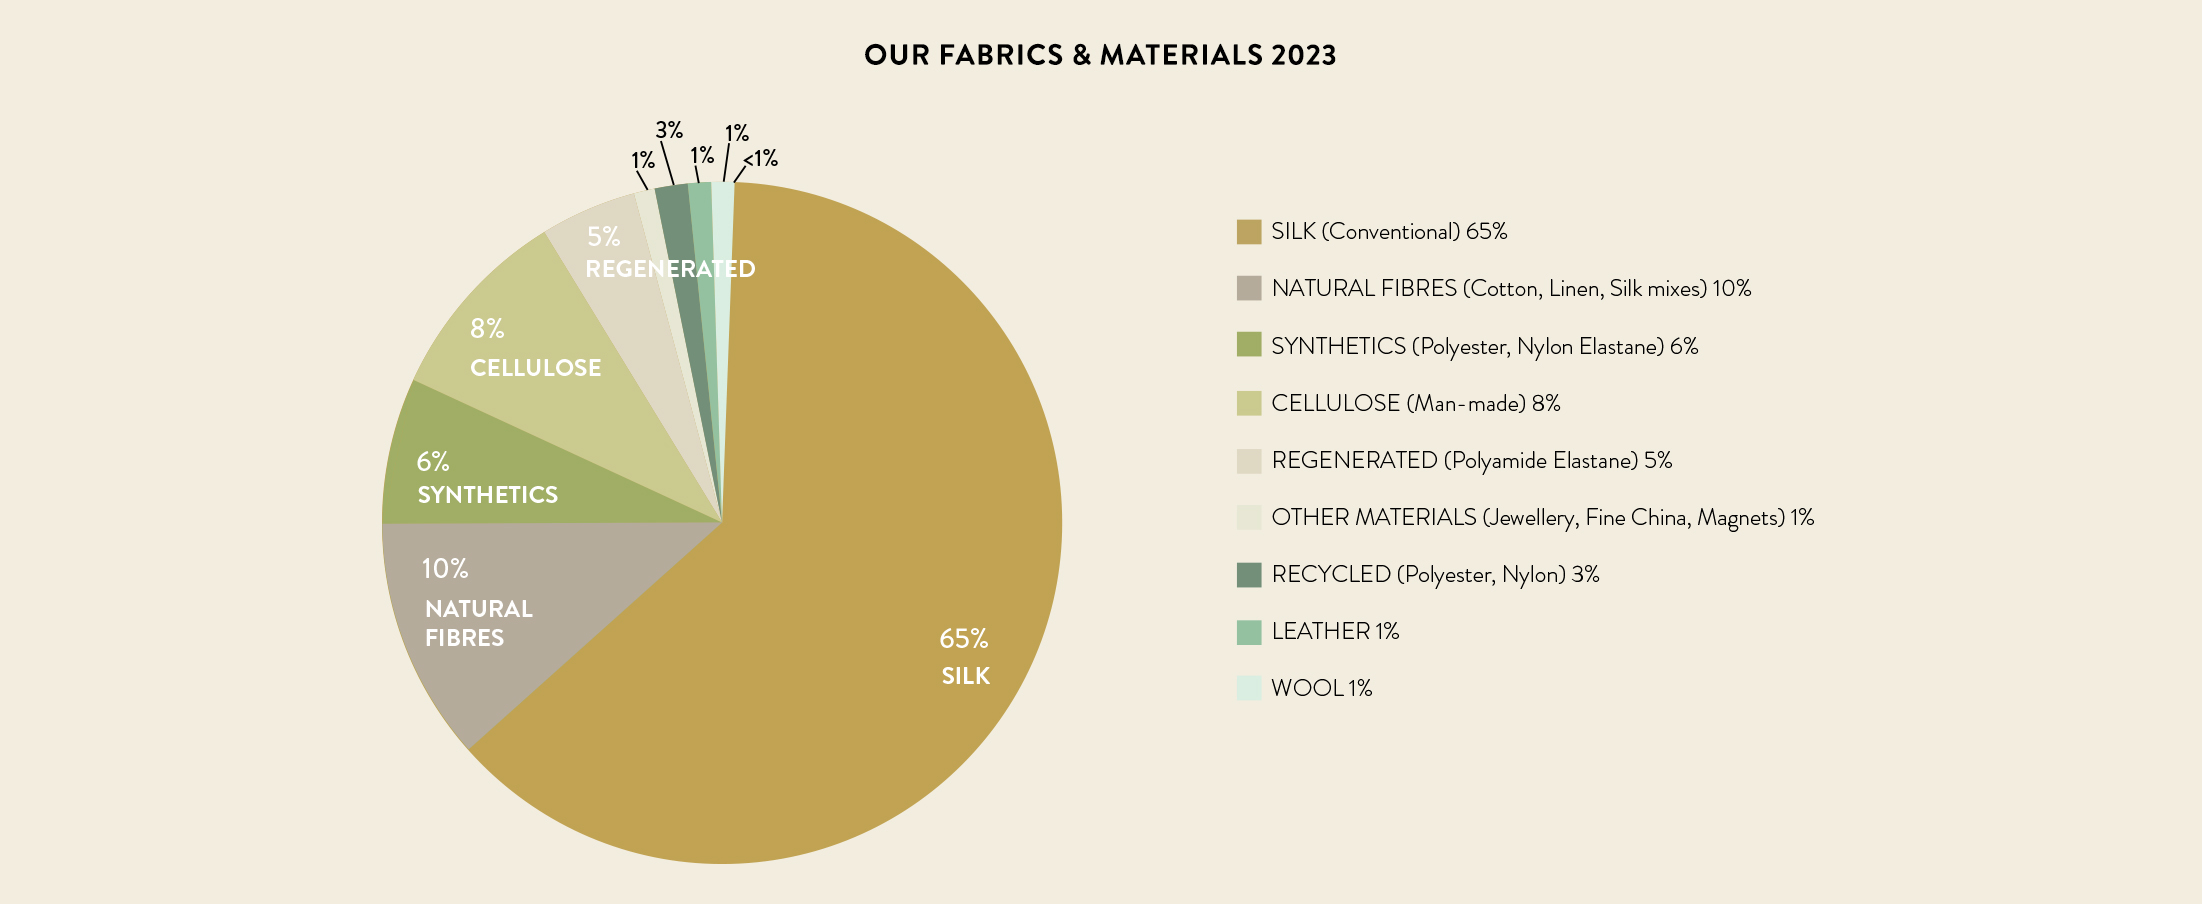 OUR FABRICS AND MATERIALS 2023 CHART